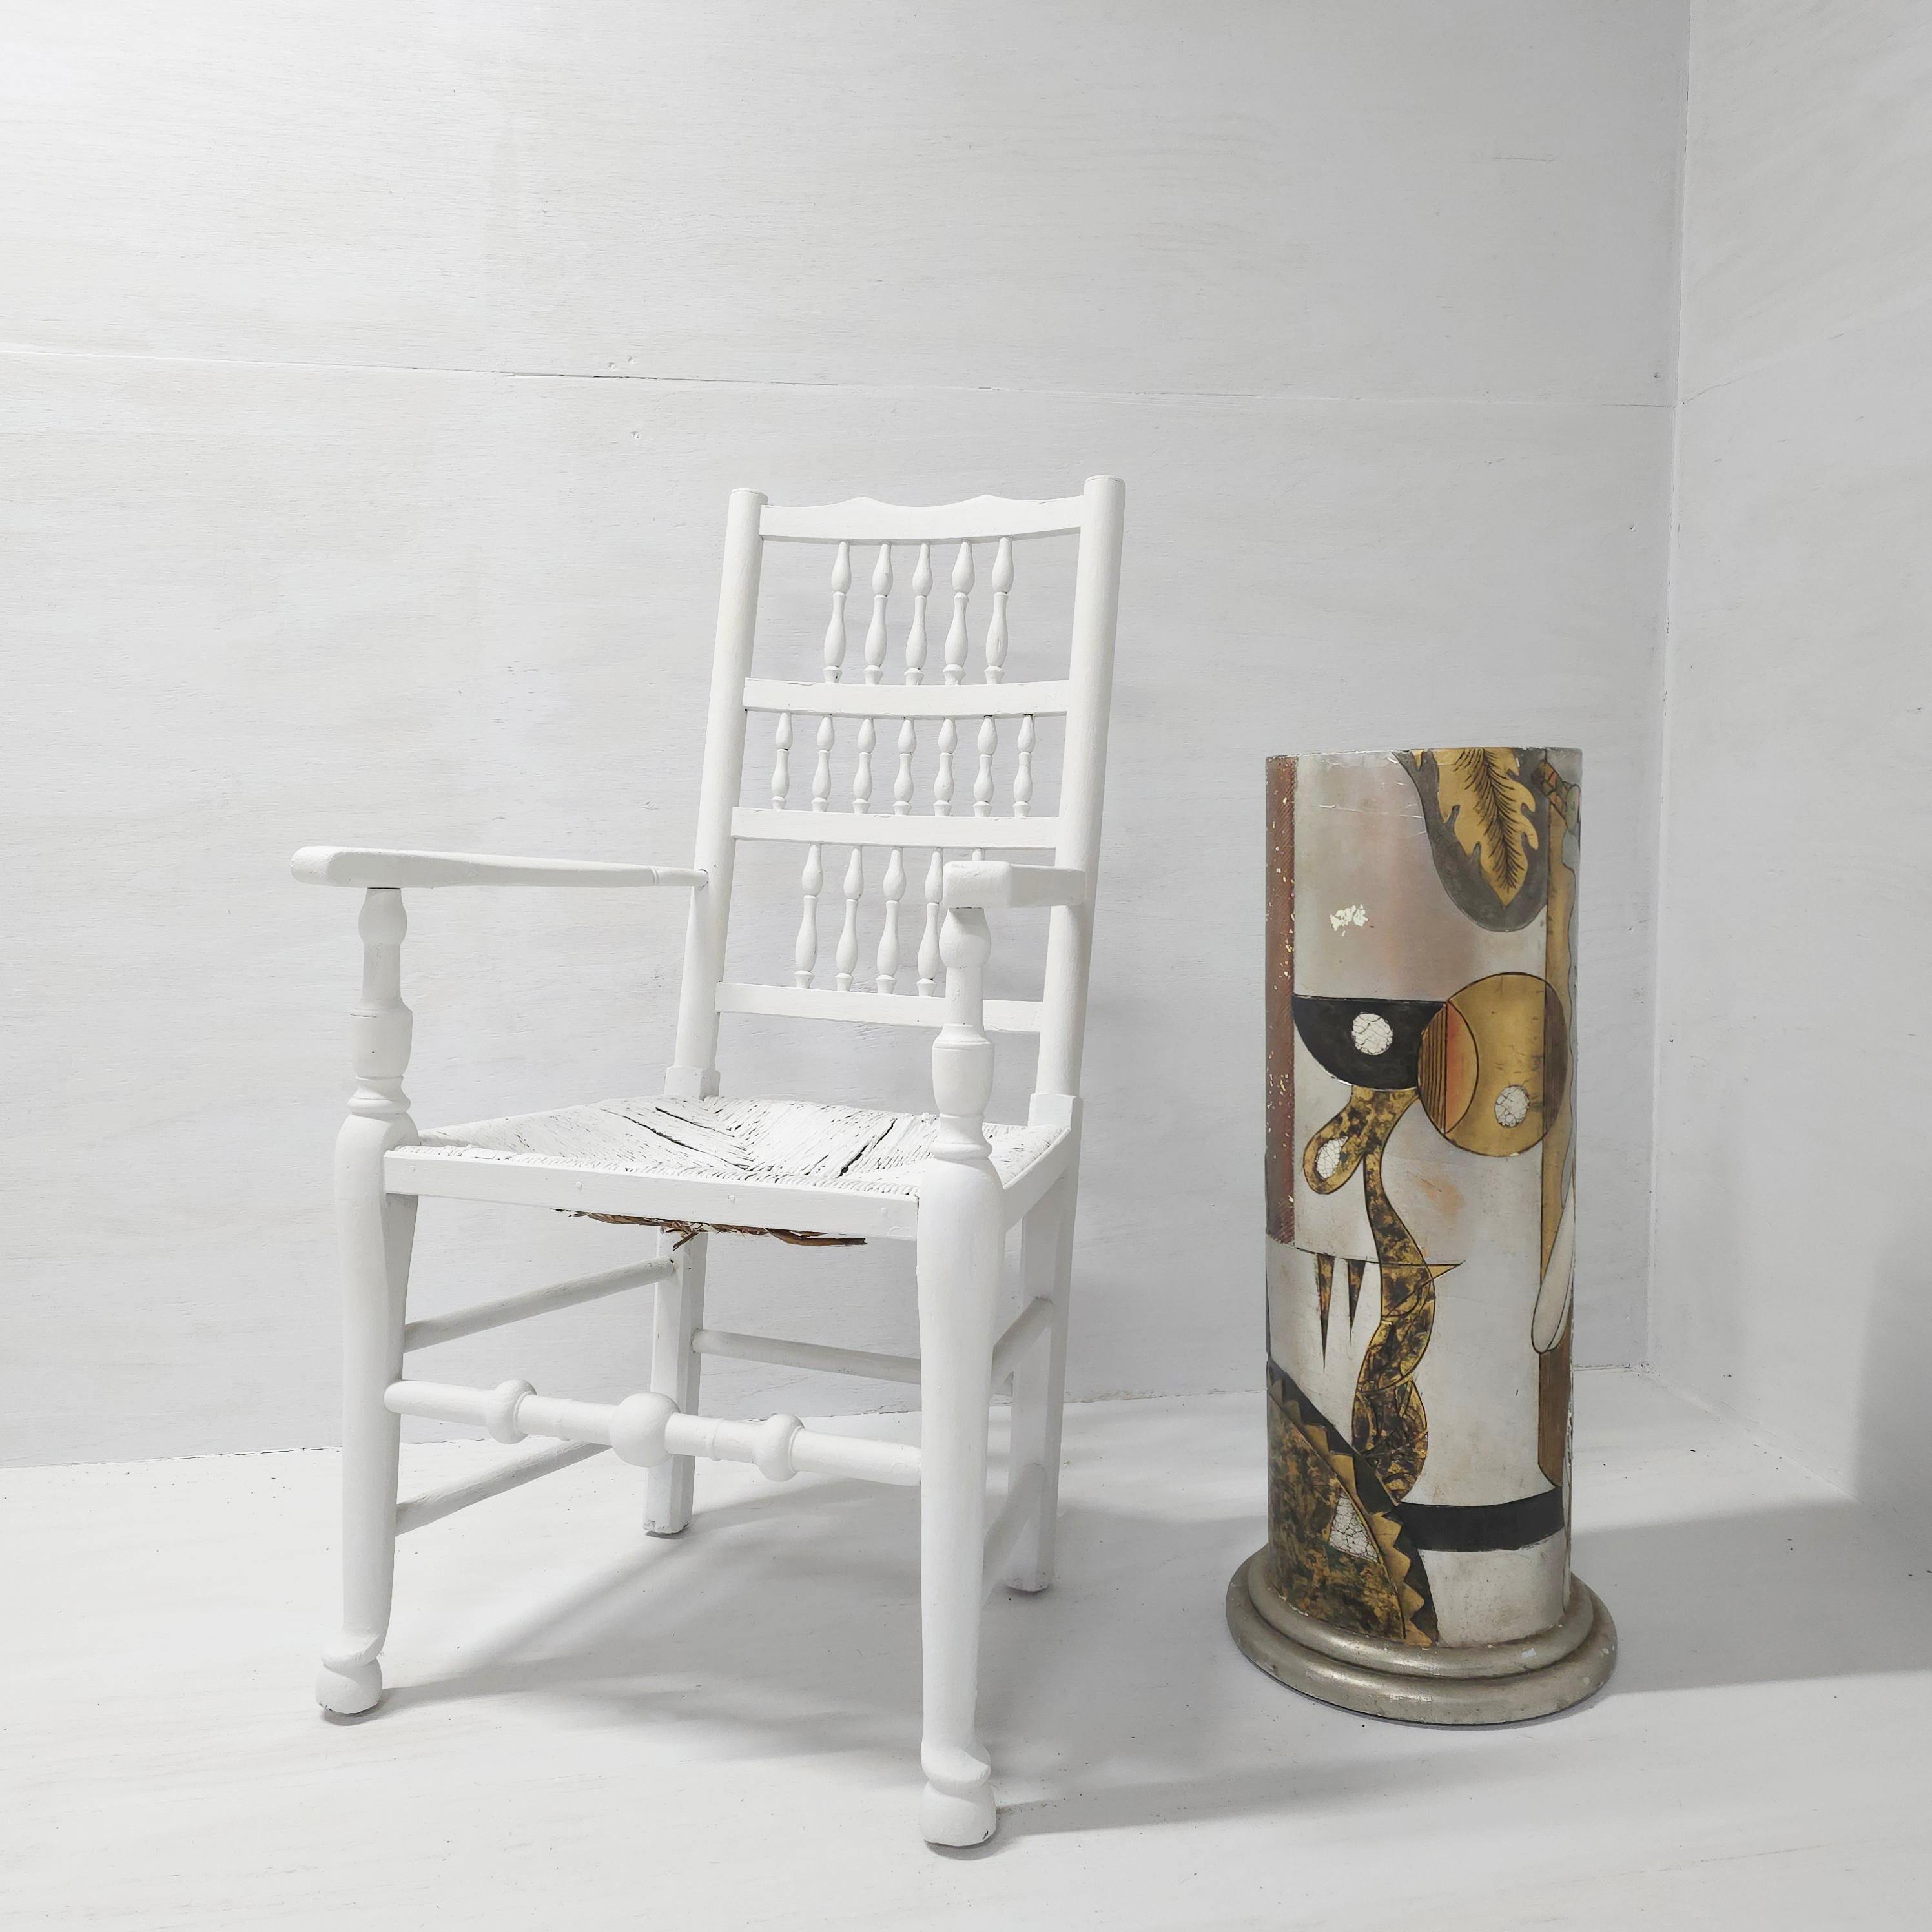 This 1980s pedestal column is like the entirety of the decade condensed and compressed into this solitary form. The Memphis slash Art Deco-ish aesthetic is brilliantly eccentric. The palate of metallic paints: platinum, gold, and copper defined the